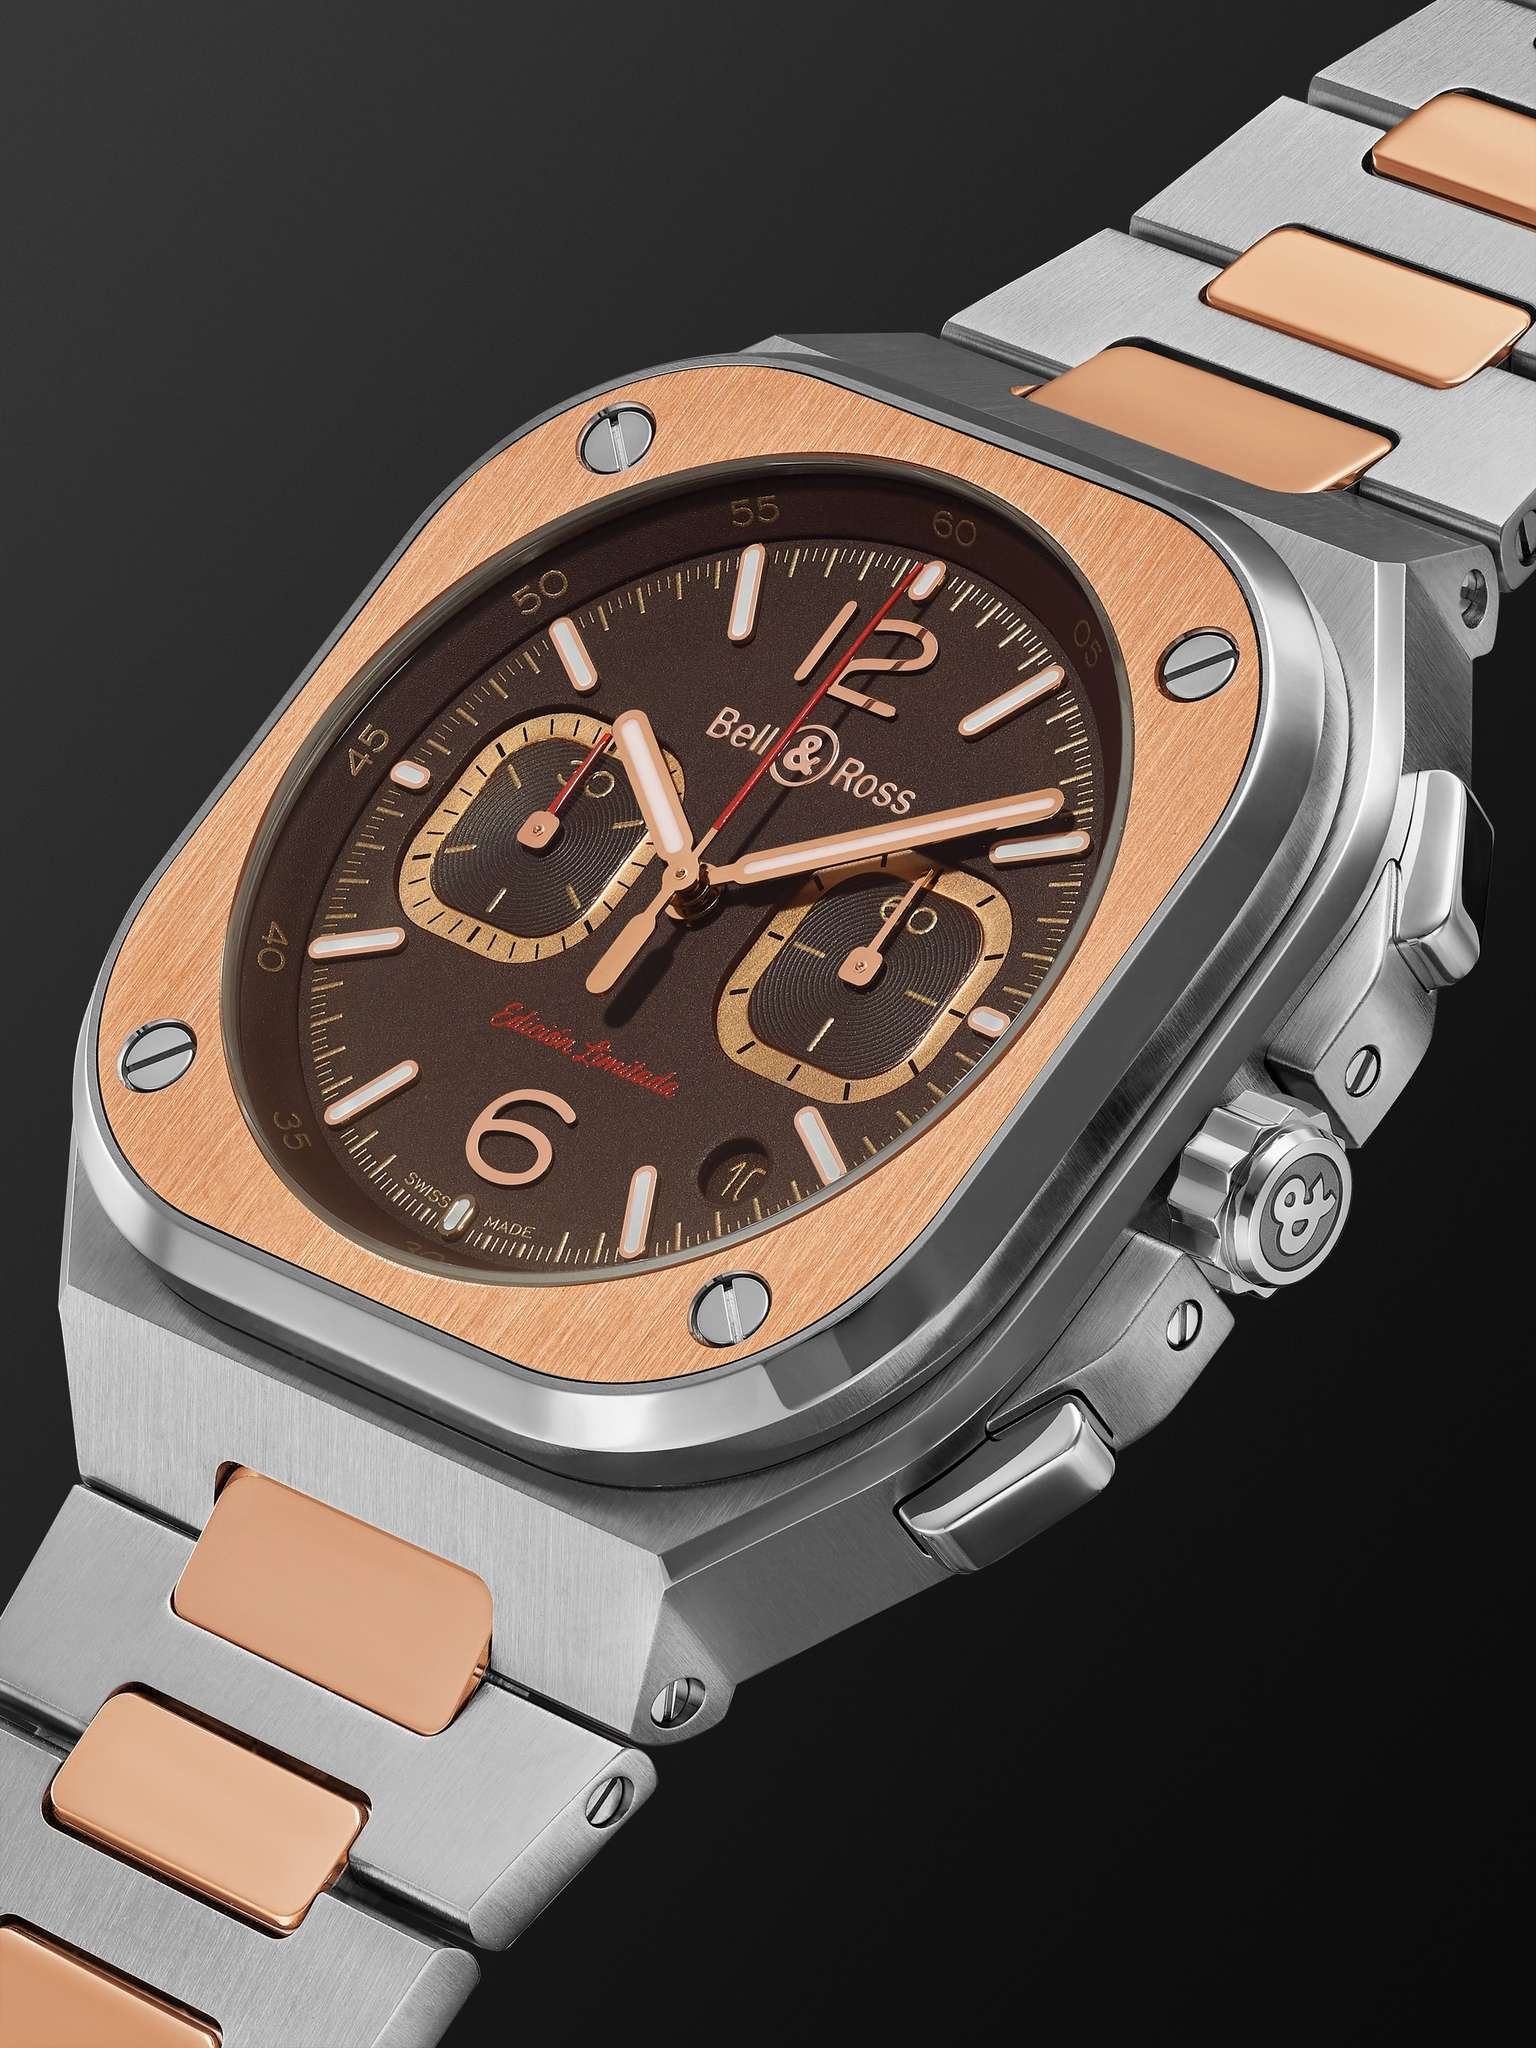 BR 05 Limited Edition Automatic Chronograph 42mm Stainless Steel and Rose Gold Watch, Ref. No. BR05C - 7